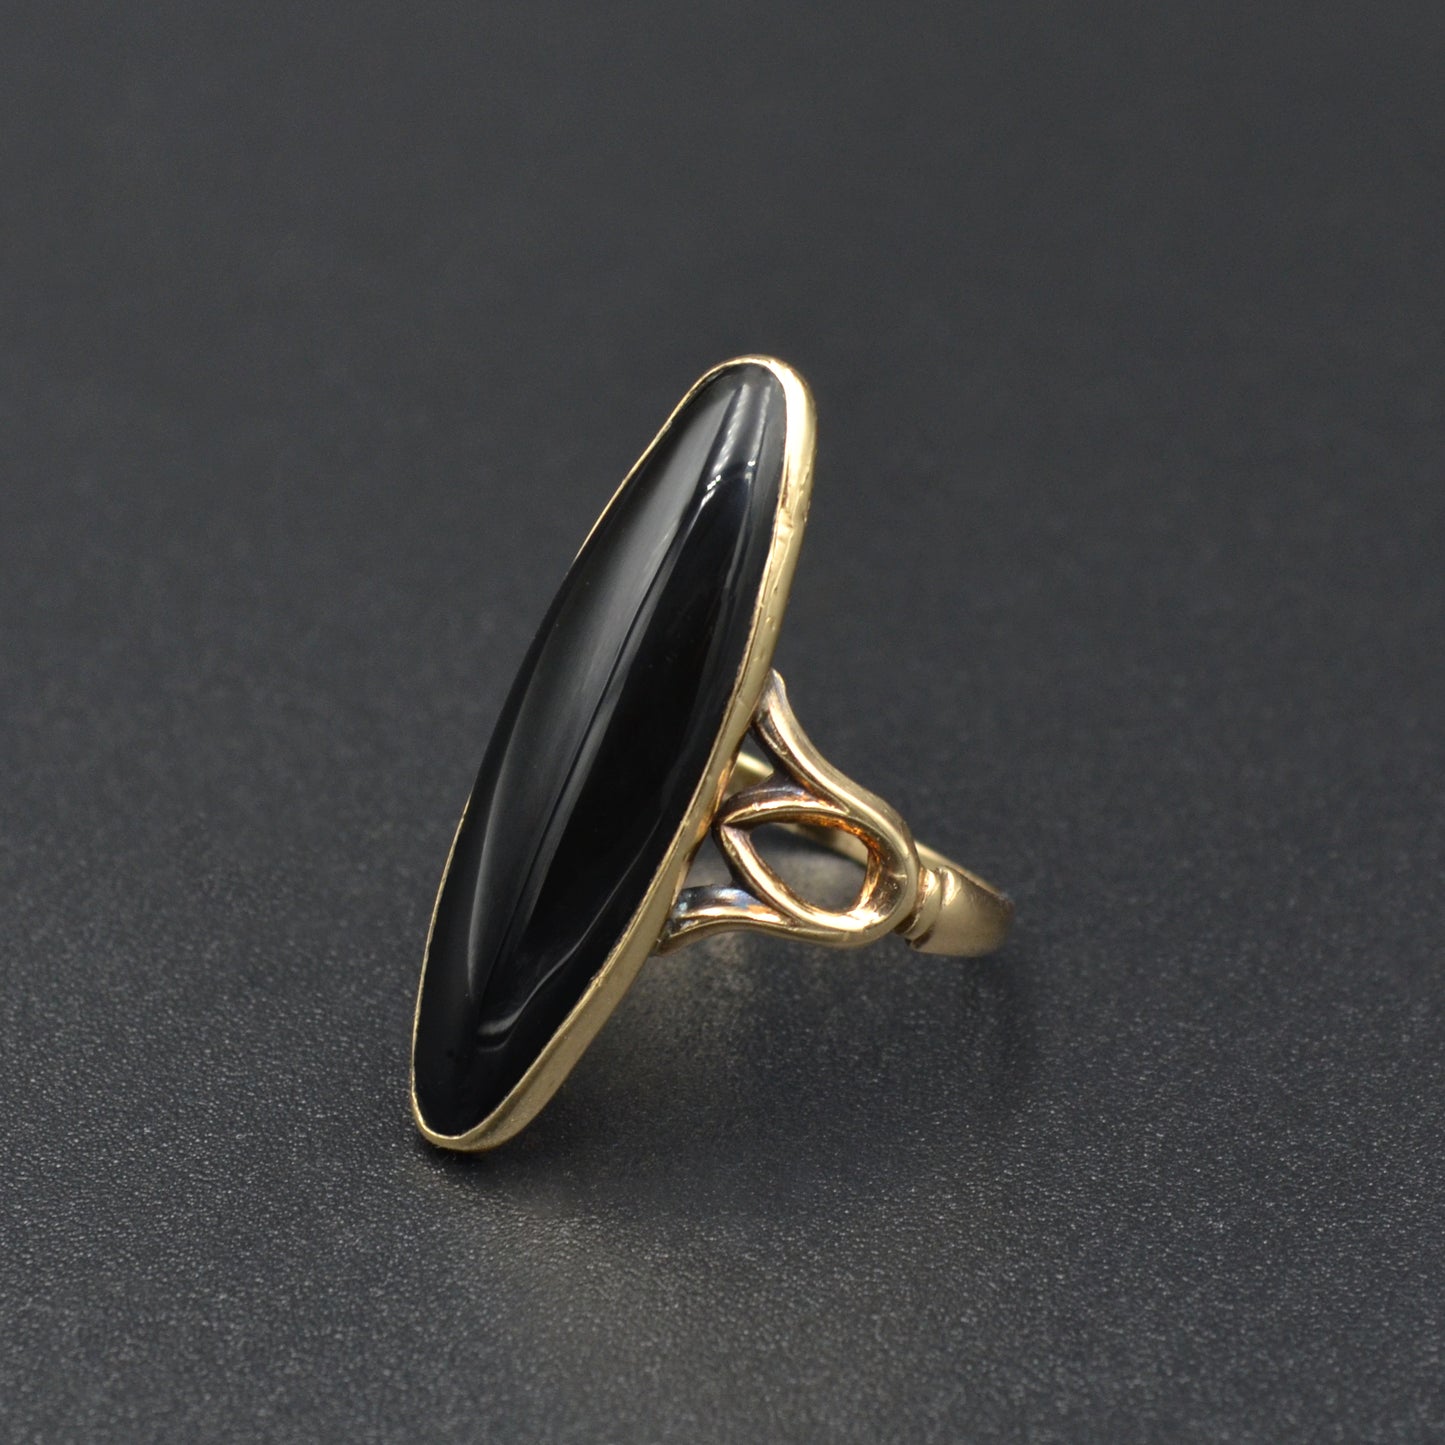 Vintage Egyptian Revival Black Onyx and 10k Gold Ring